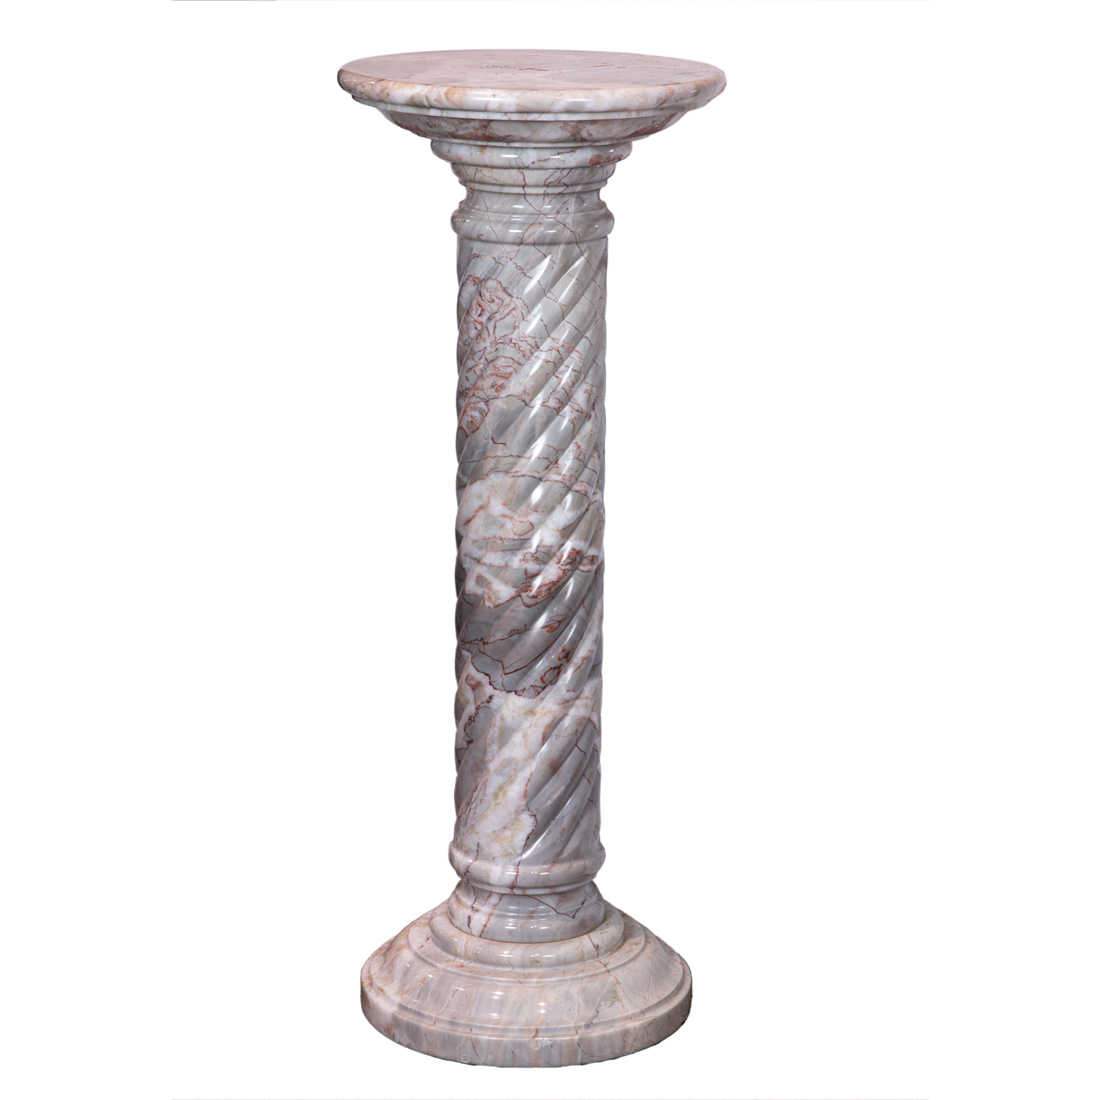 A NEOCLASSICAL STYLE POLISHED VARIEGATED 2d128e